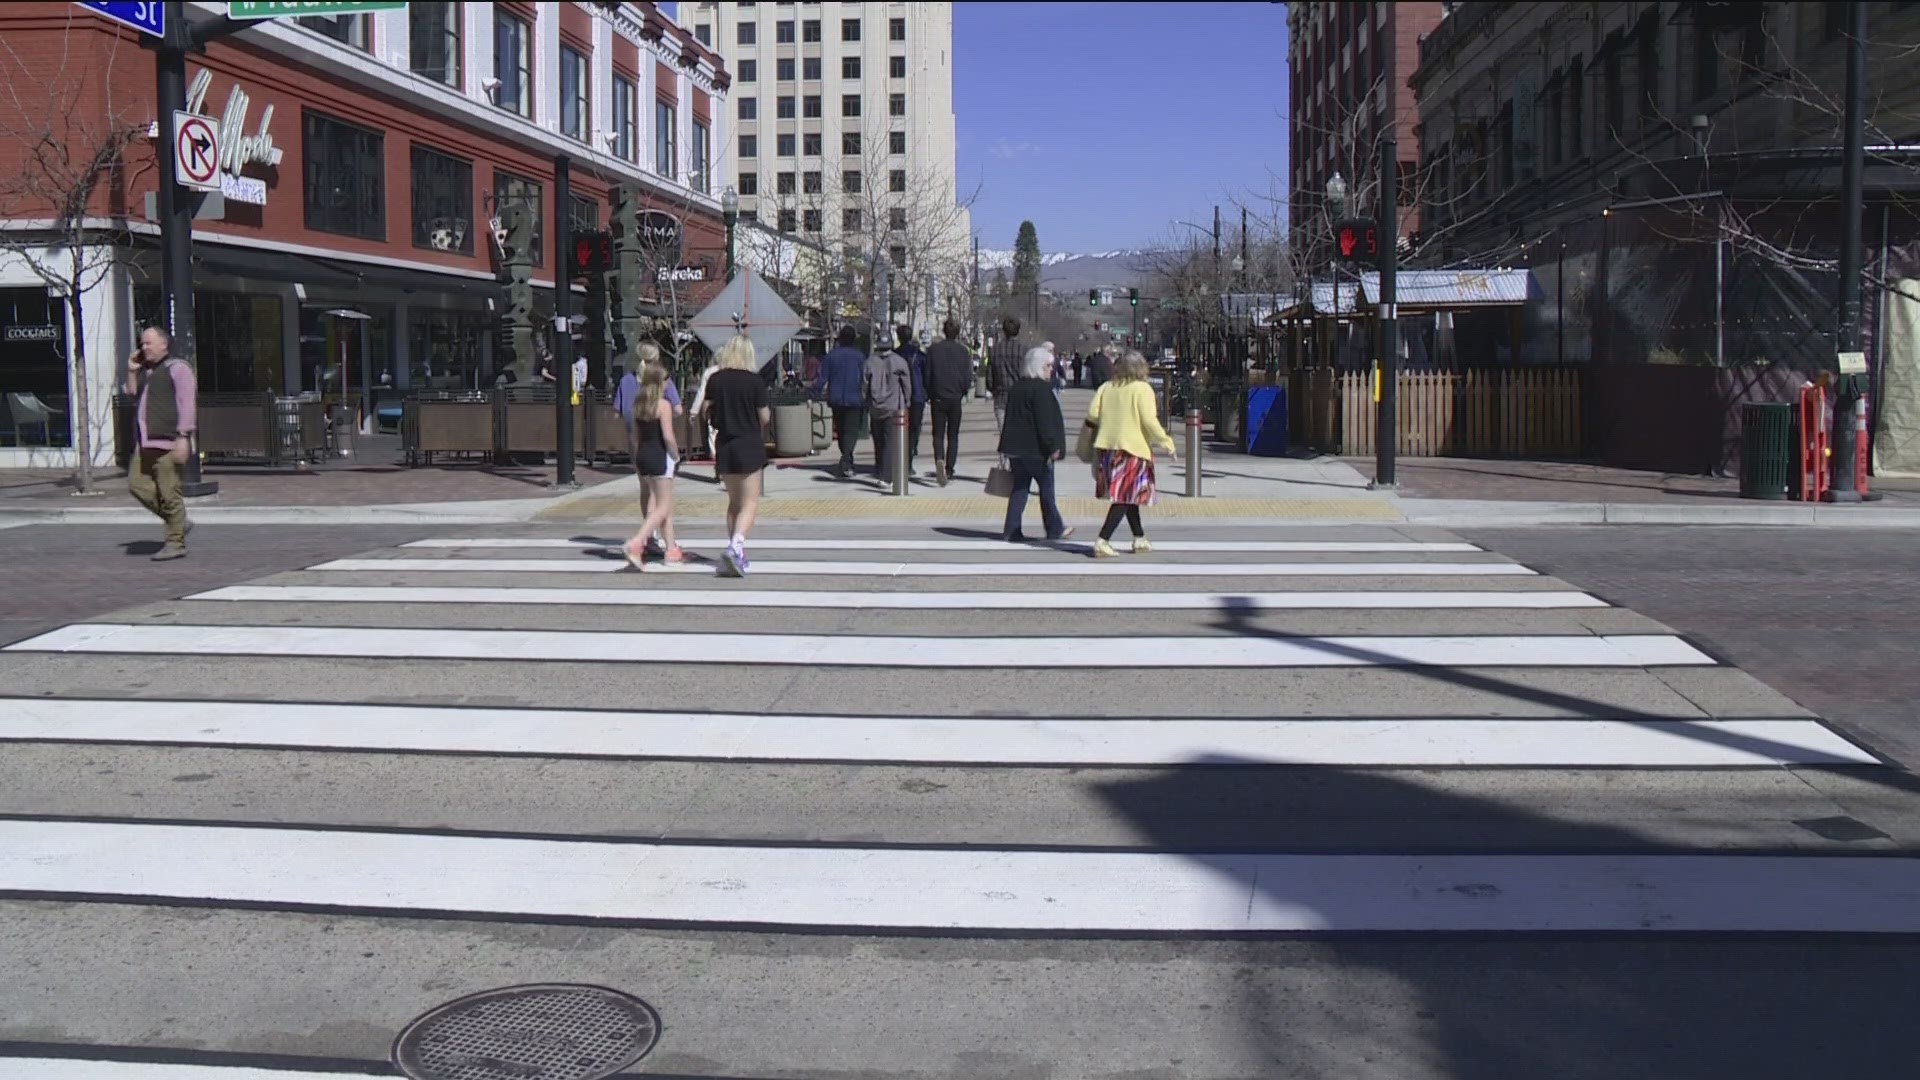 City leaders celebrated the improvements making it easier to walk around one of the busiest streets in the city of trees.